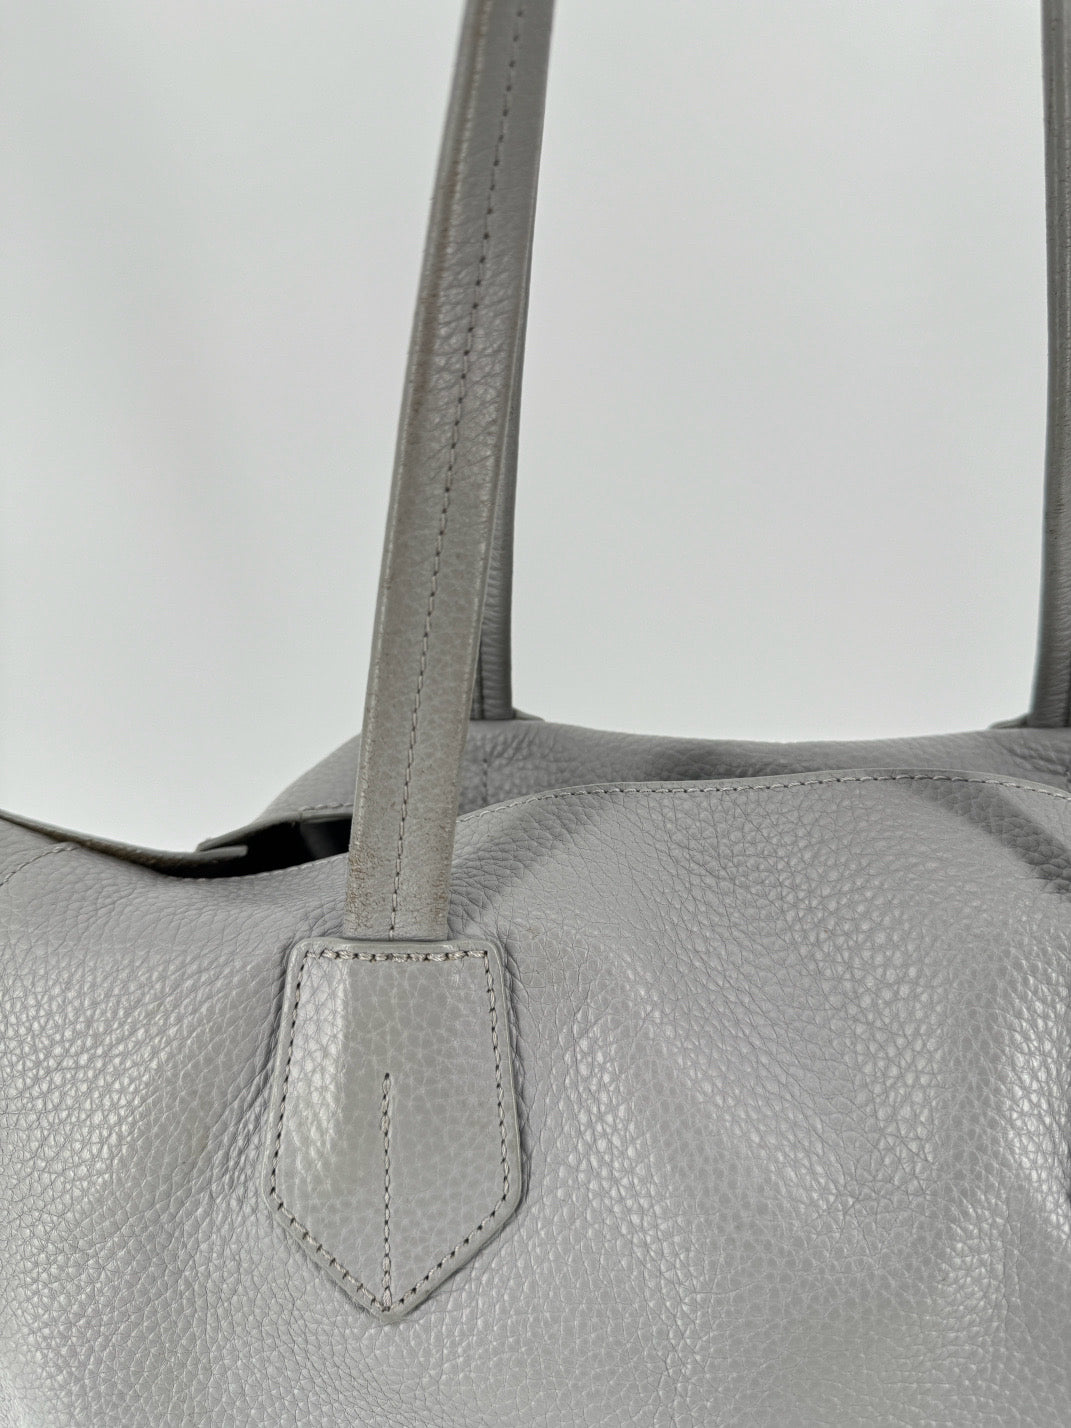 NEELY & CHLOE Ice Blue Leather Tote